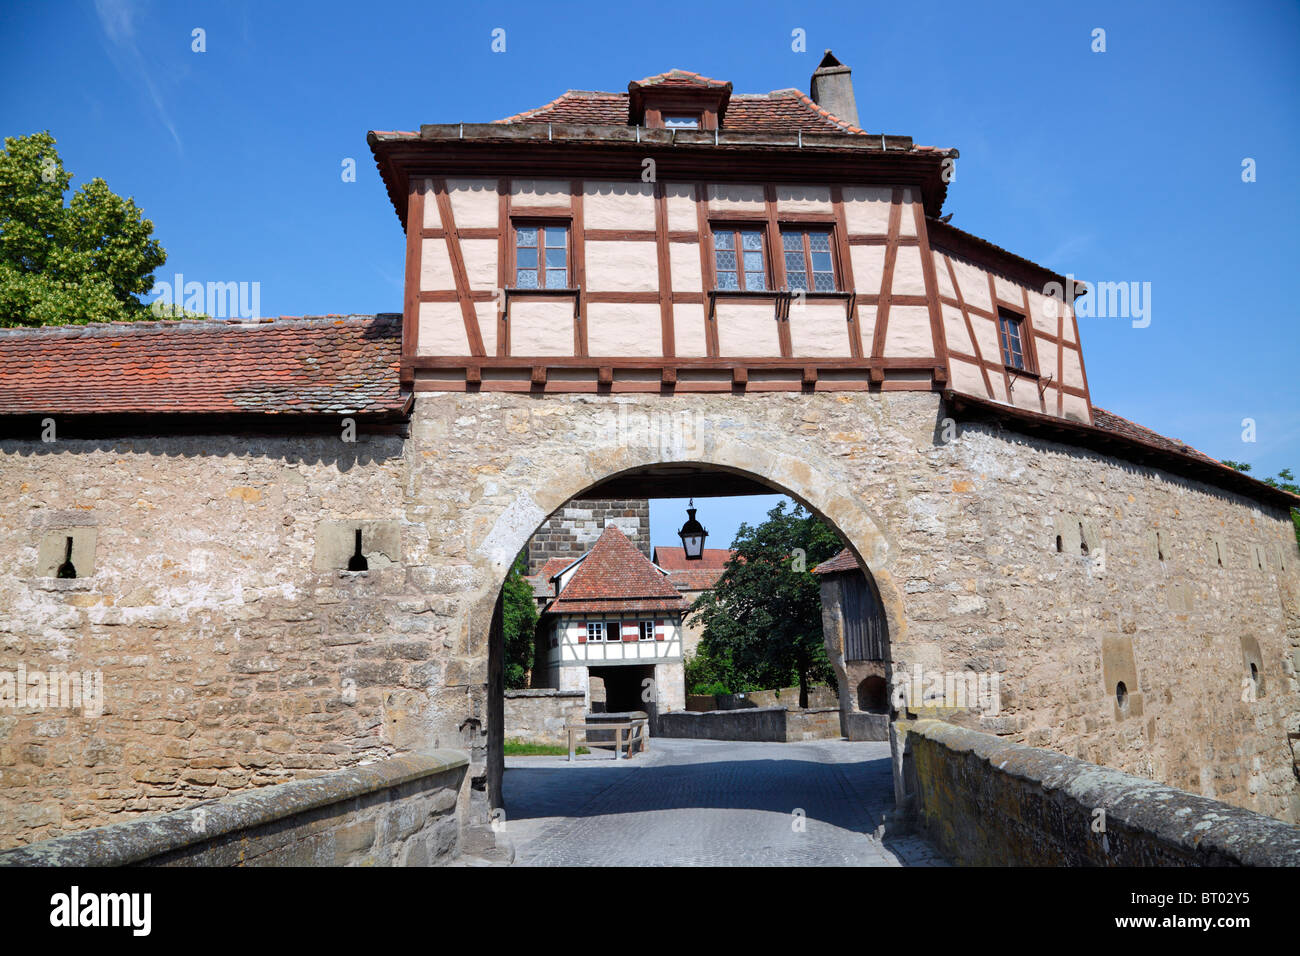 Röder Bastion in the medieval city ring wall around Rothenburg ob der Tauber, Germany. Röder Tower is behind the bastion. Stock Photo